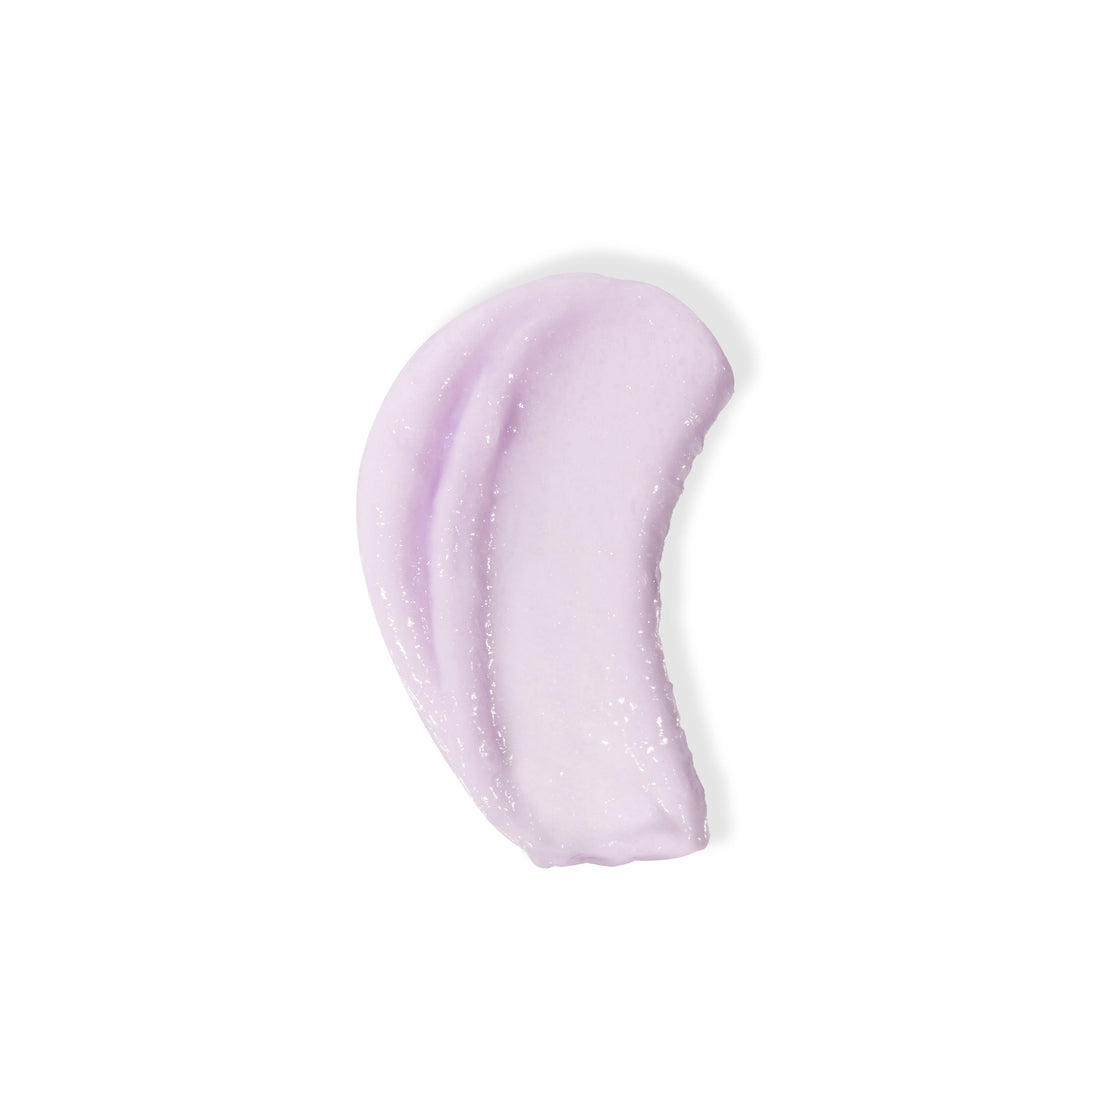 A lavender swatch of the Perfect Dream Night Ritual Hair Masque on a plain white background.